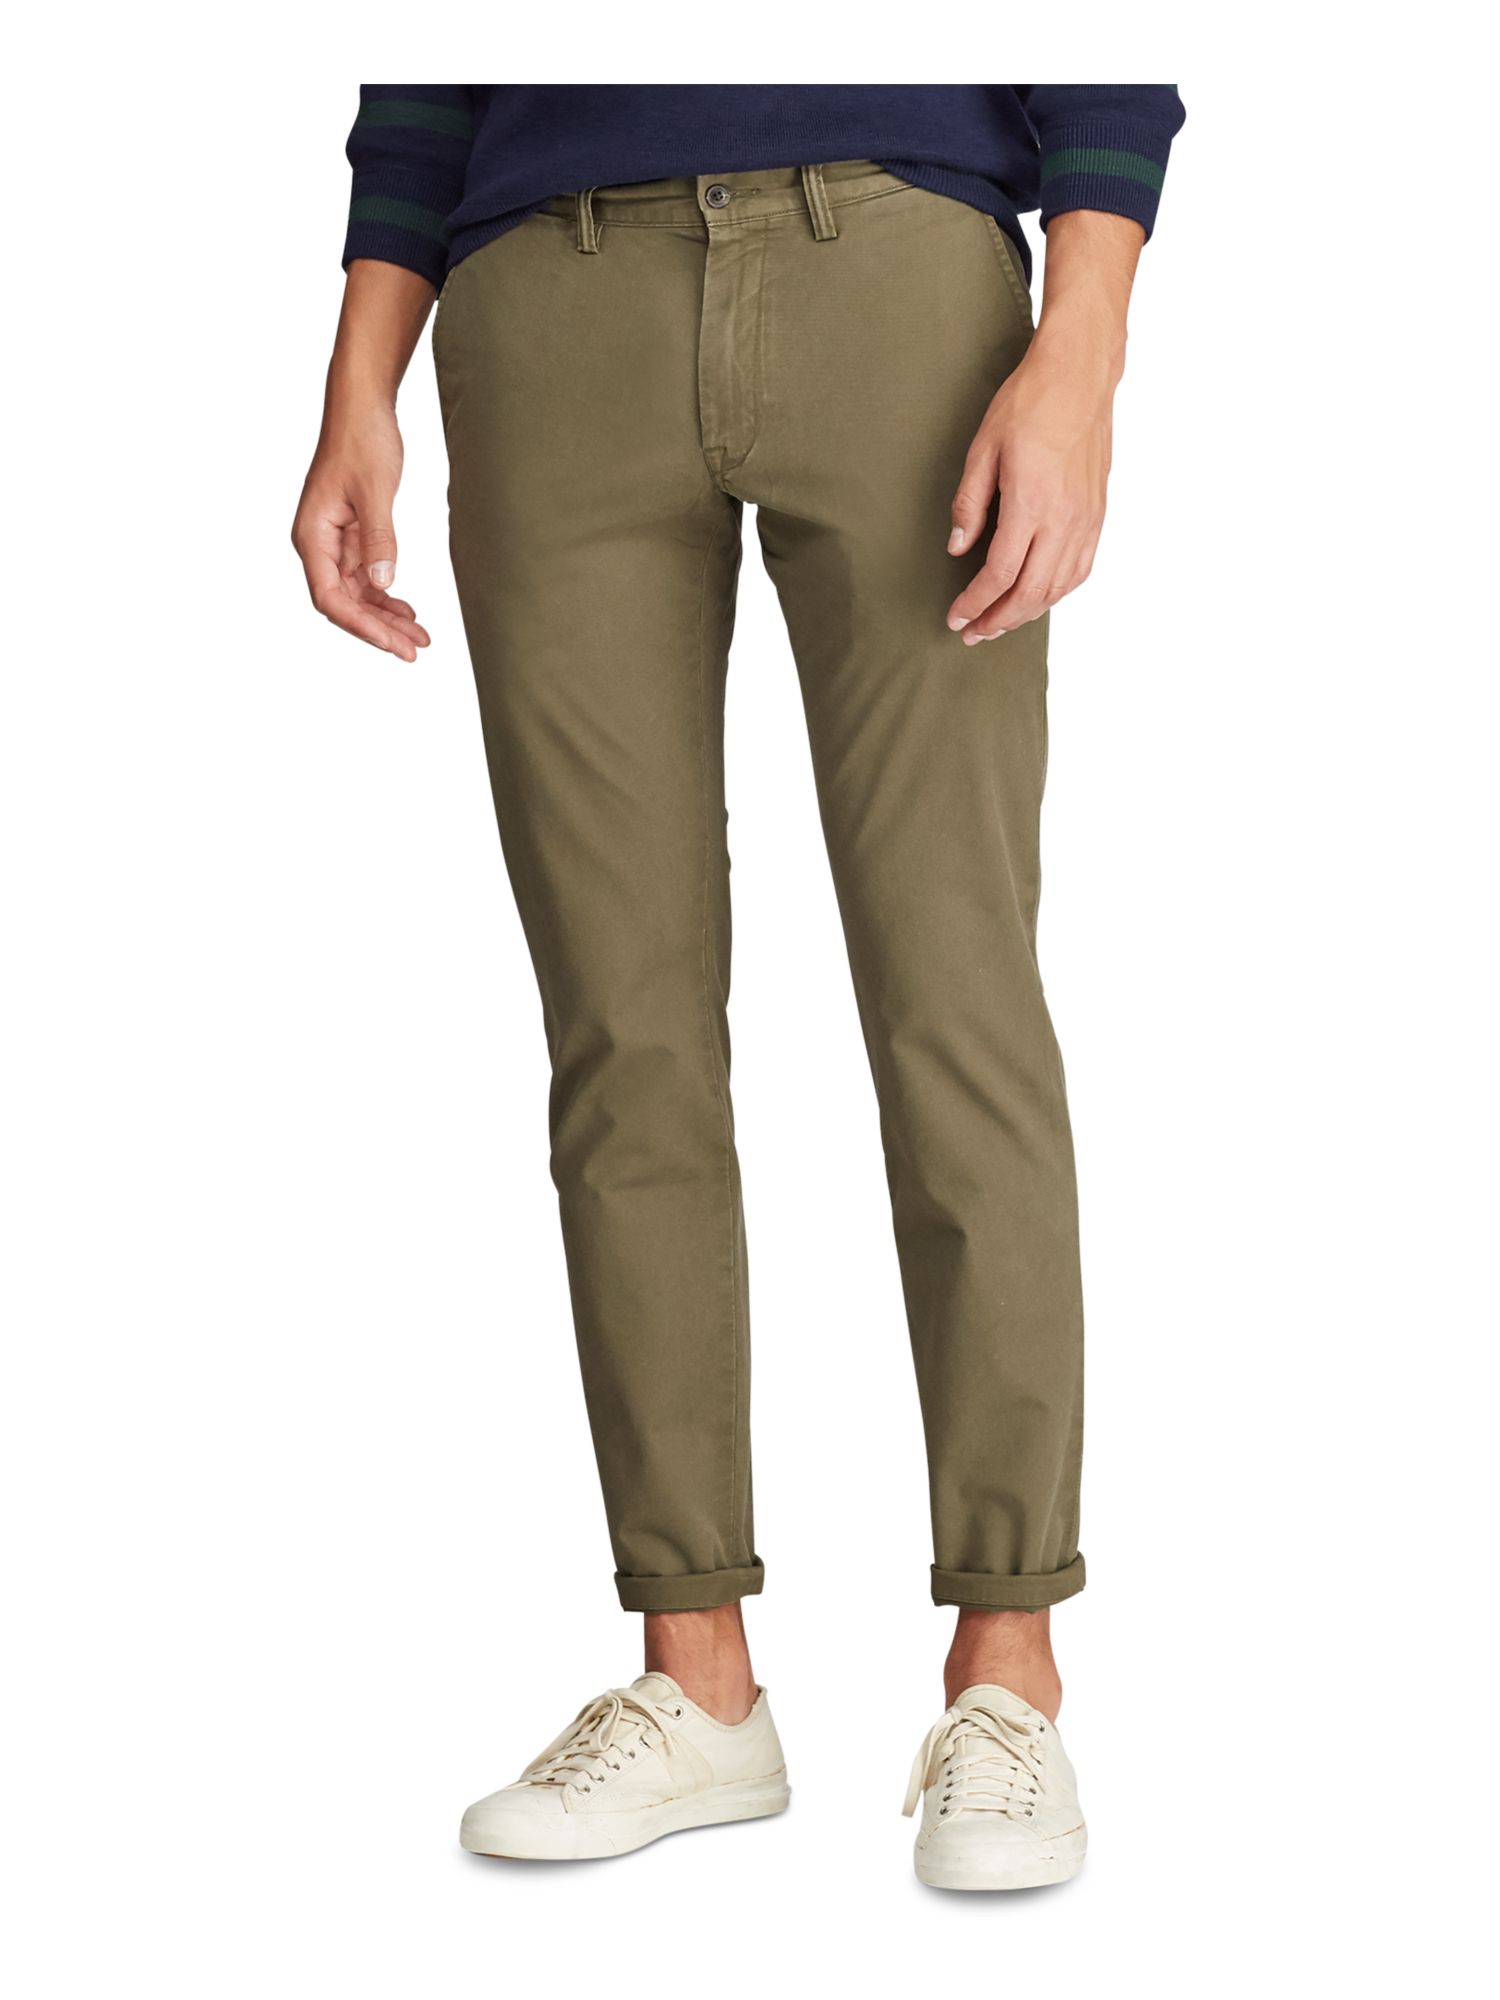 Ralph Lauren POLO RALPH LAUREN Mens Green Flat Front, Tapered, Slim Fit  Cotton Chino Pants W38/ L32